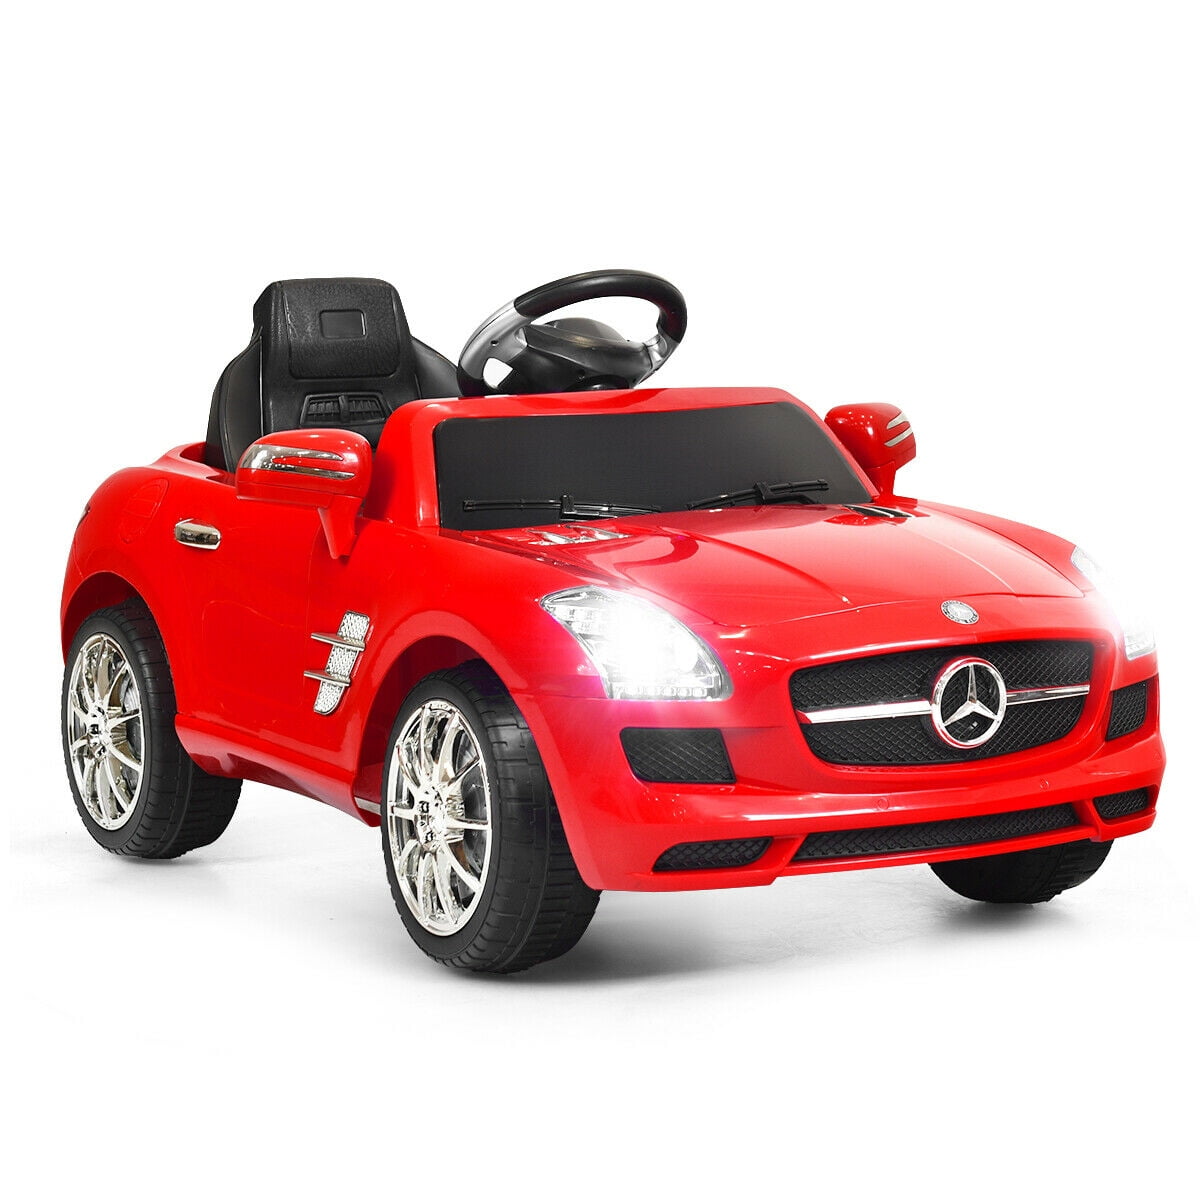 6V Kids Ride On Car RC Remote Control Battery Powered LED Lights Christmas Gift 